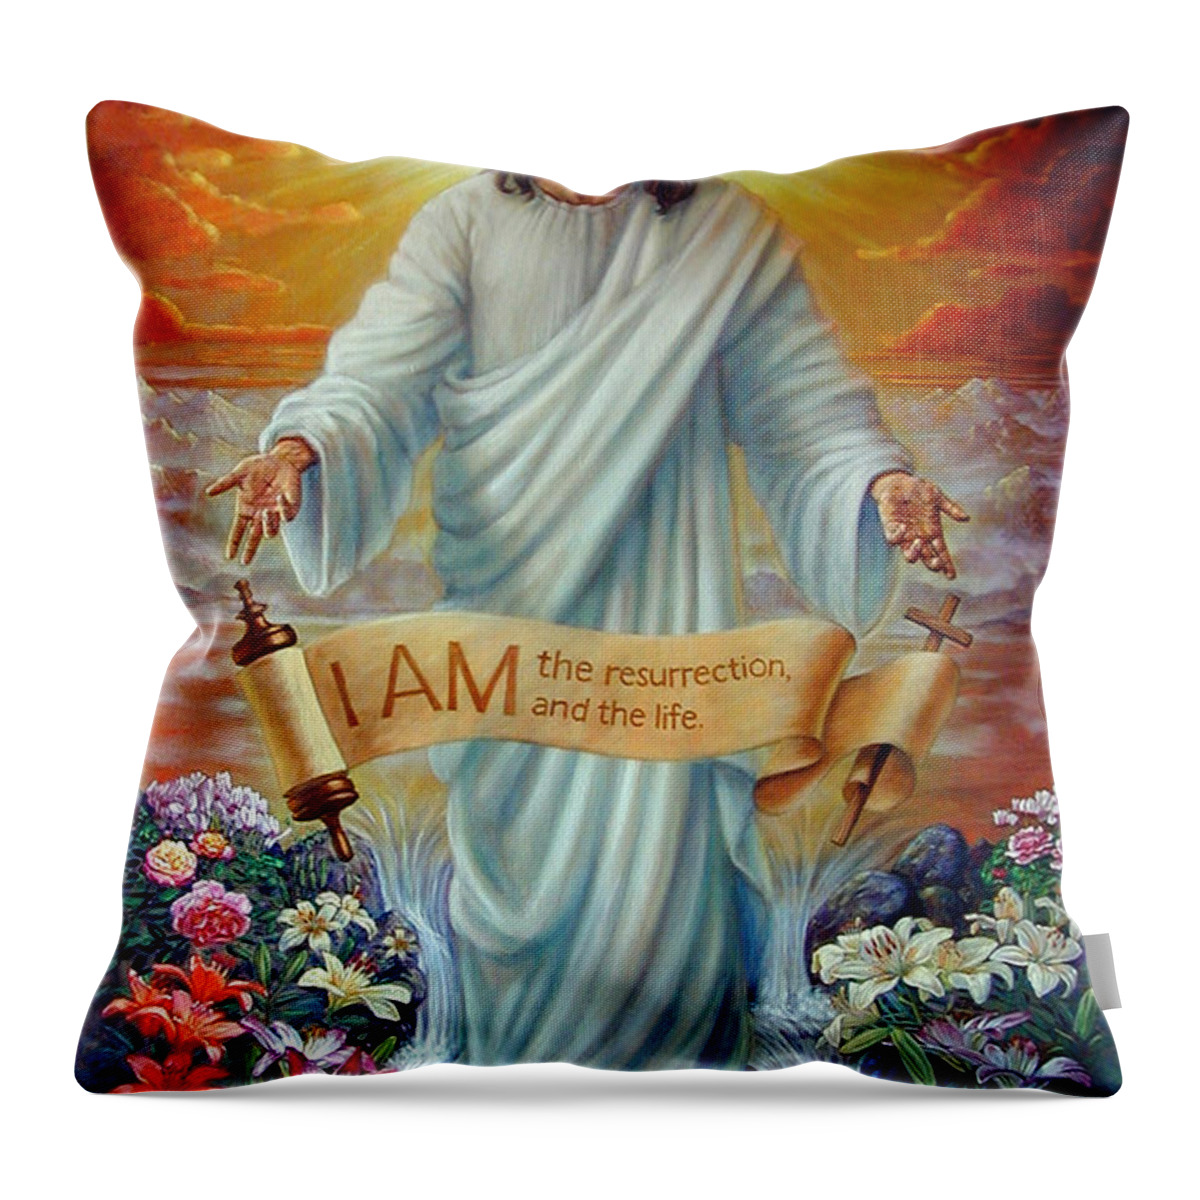 Jesus Christ Throw Pillow featuring the painting I AM the Resurrection by John Lautermilch